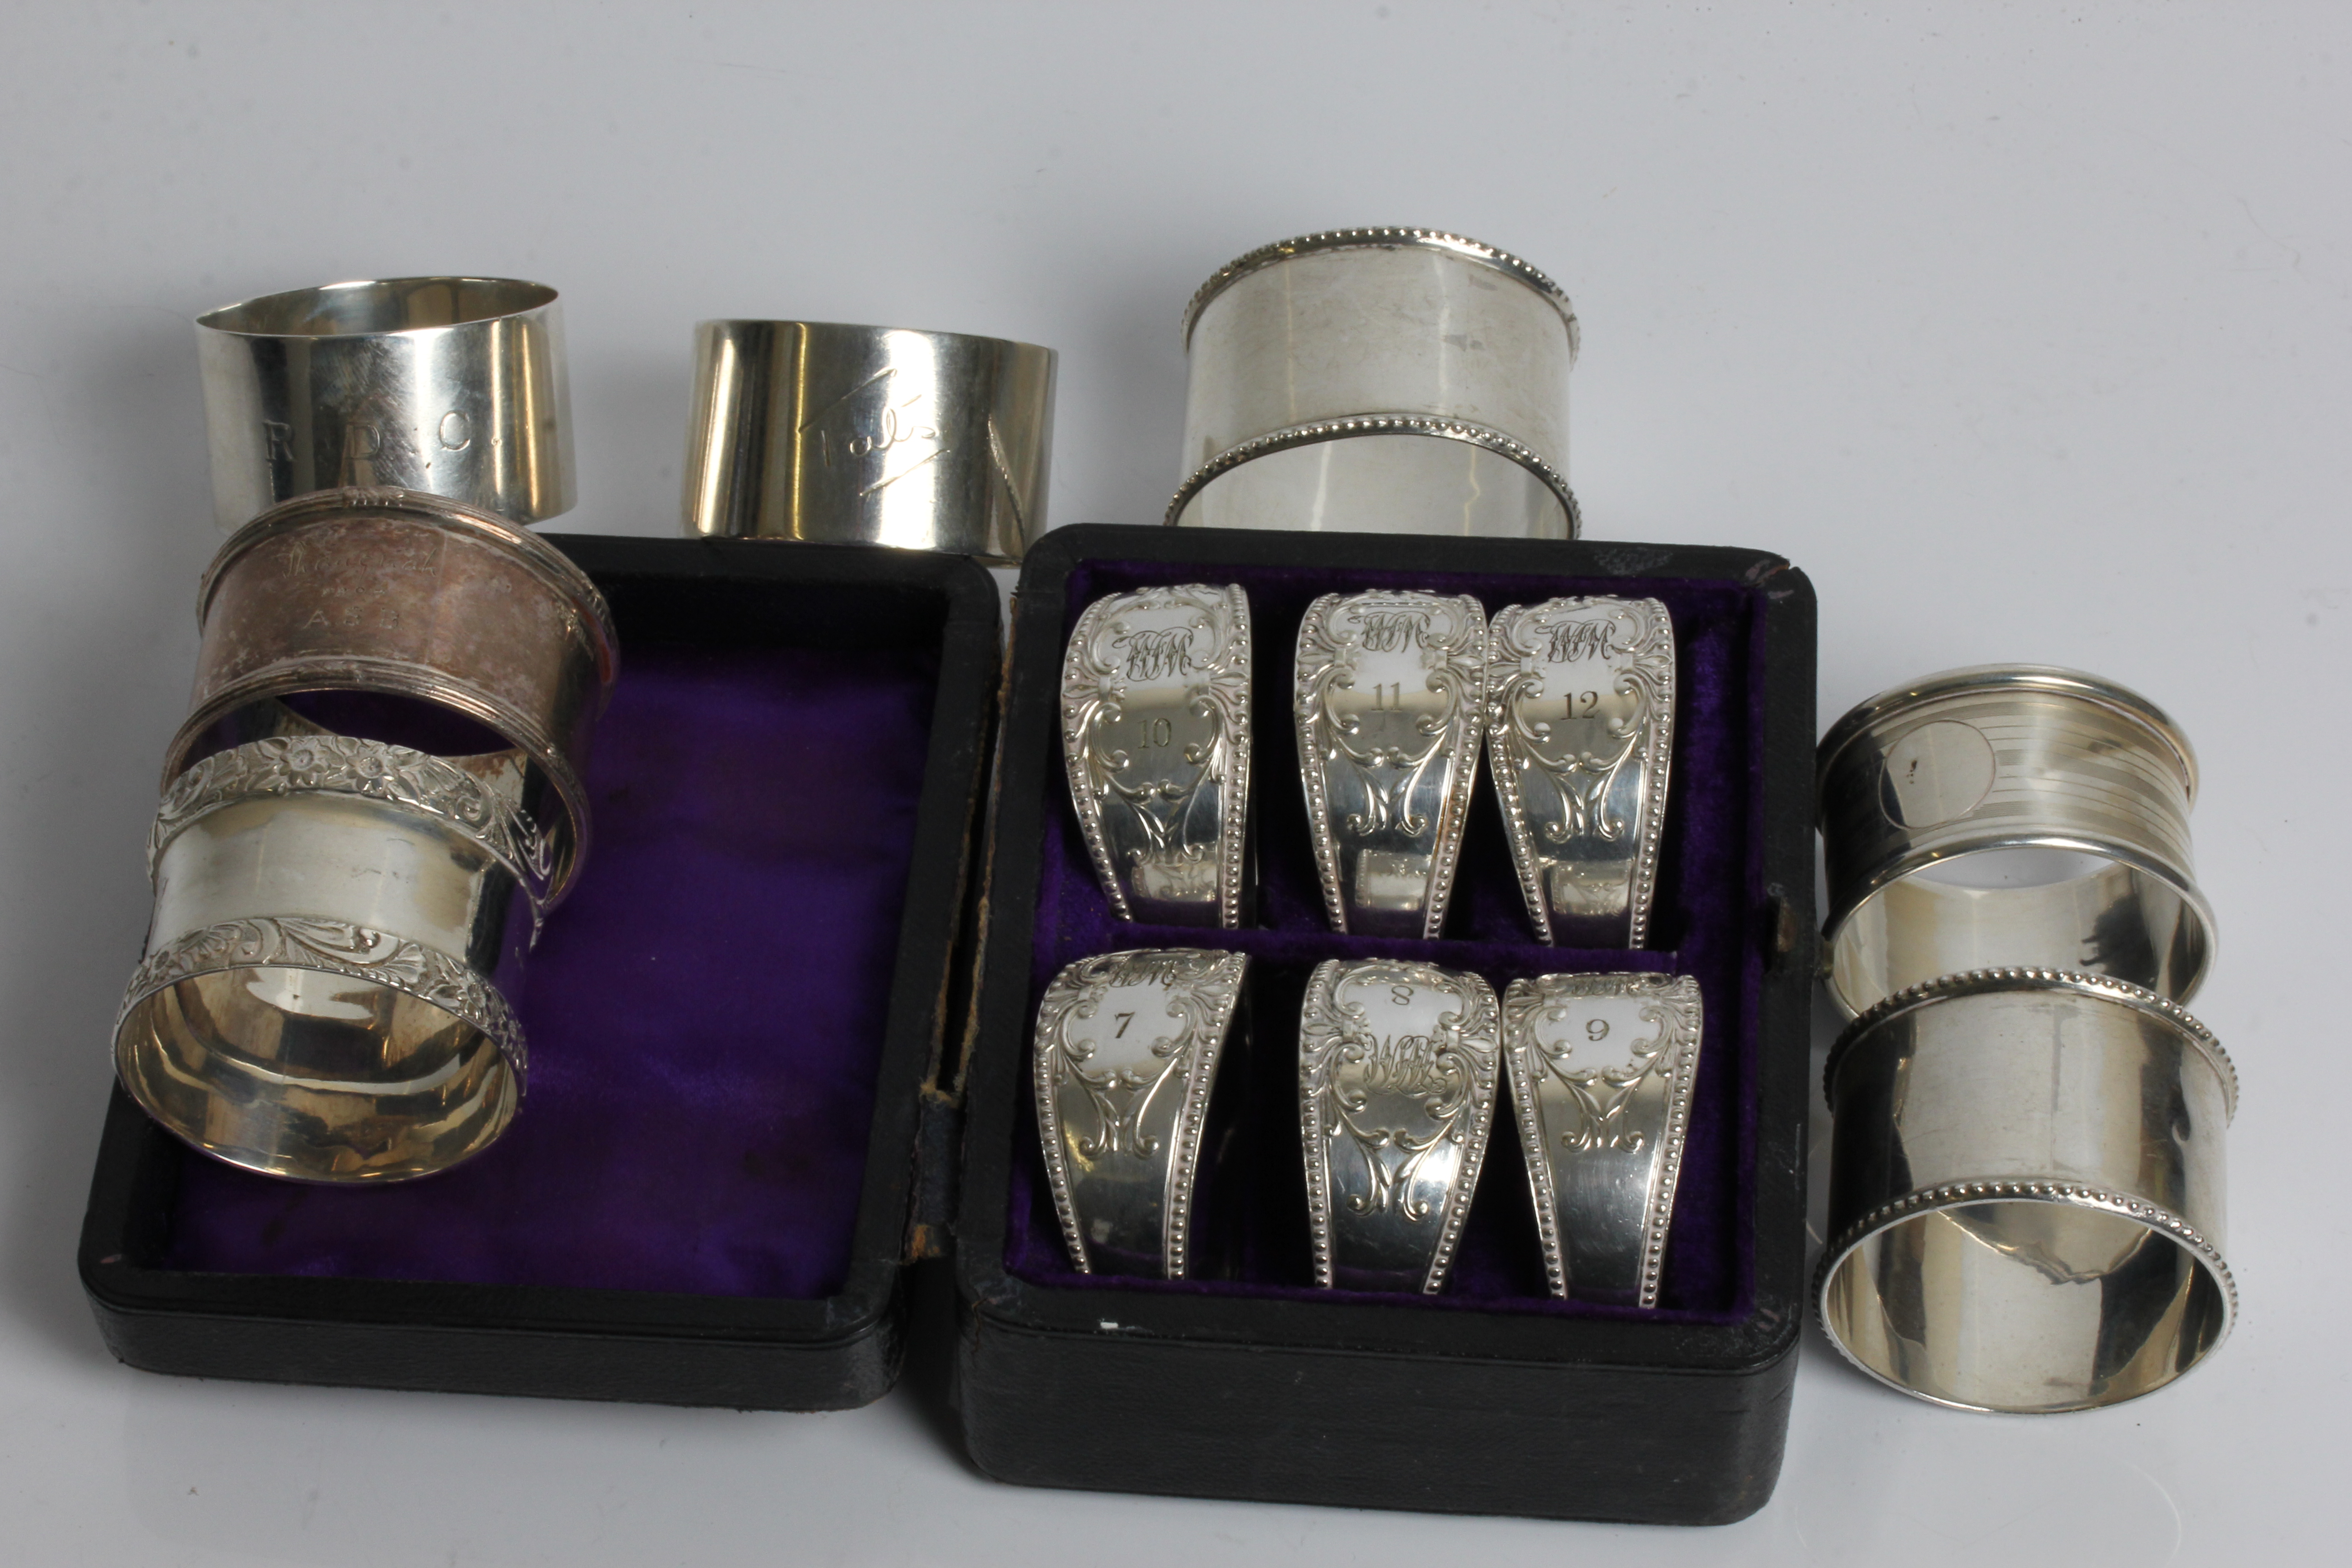 Seven various silver napkin rings, with a set of six napkin rings engraved 'WJM' and 7-12, in